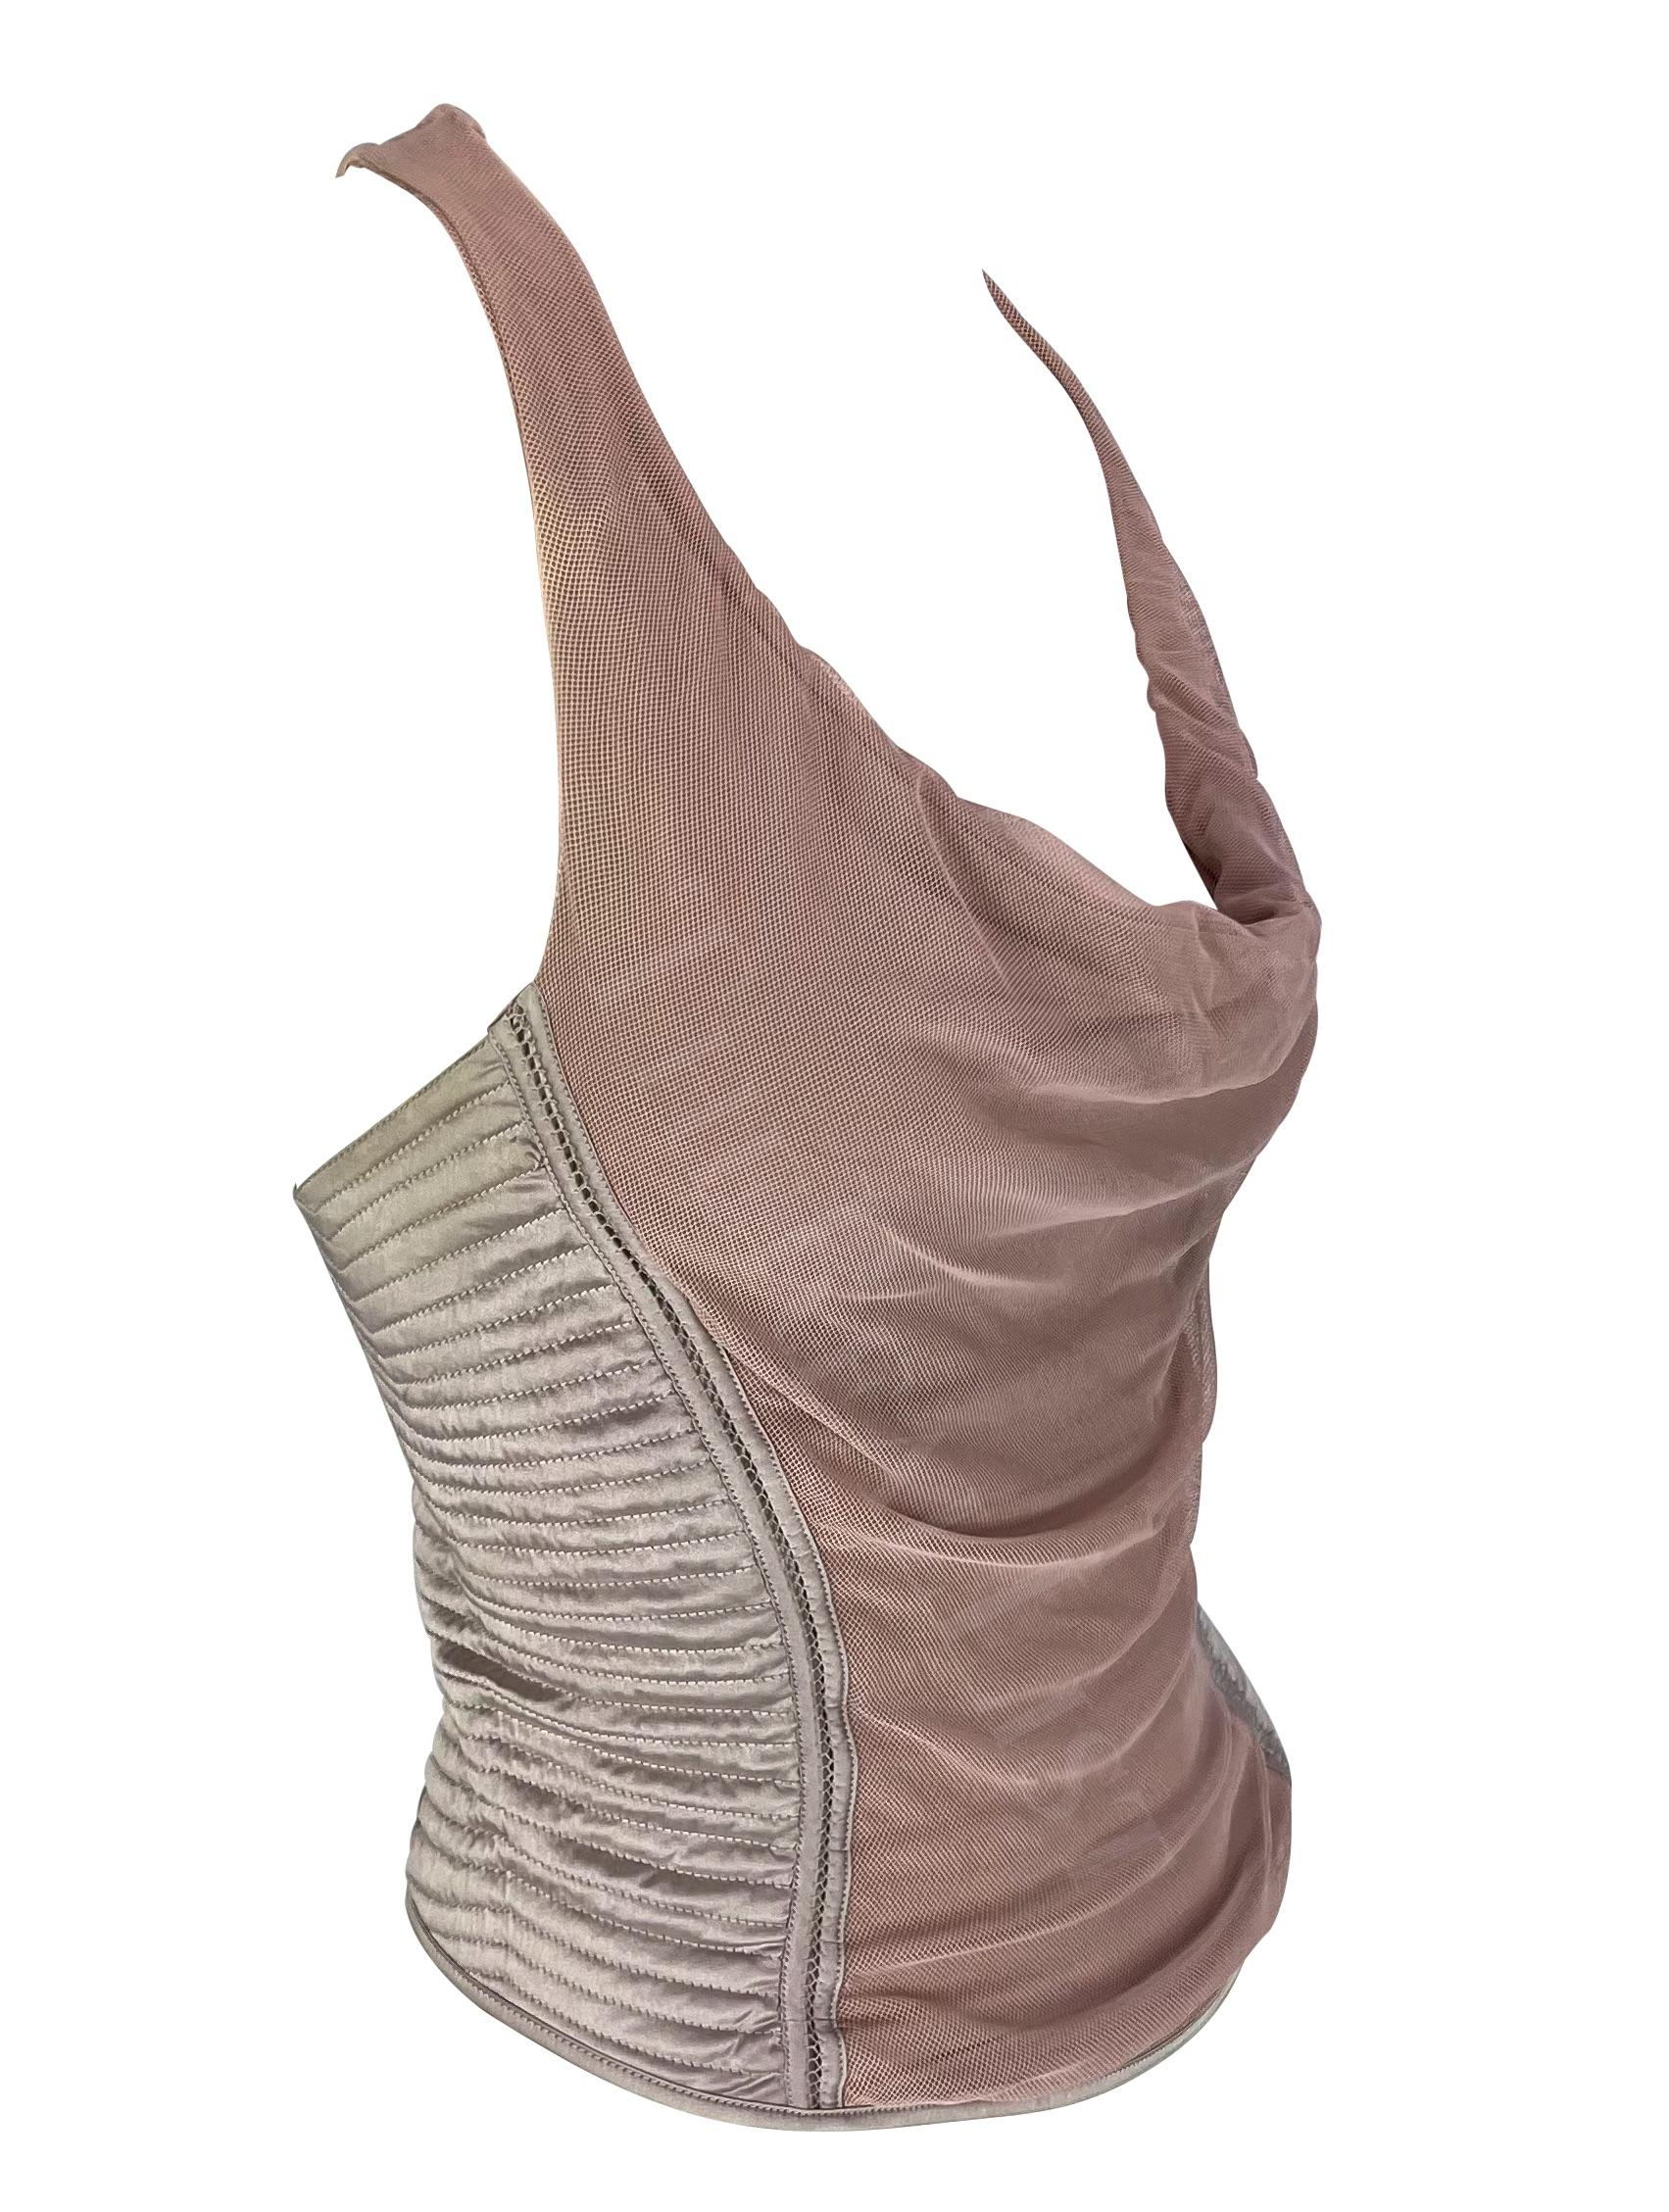 F/W 2003 Gucci by Tom Ford Pink Mesh Quilted Satin Stretch Racerback Tank Top For Sale 1